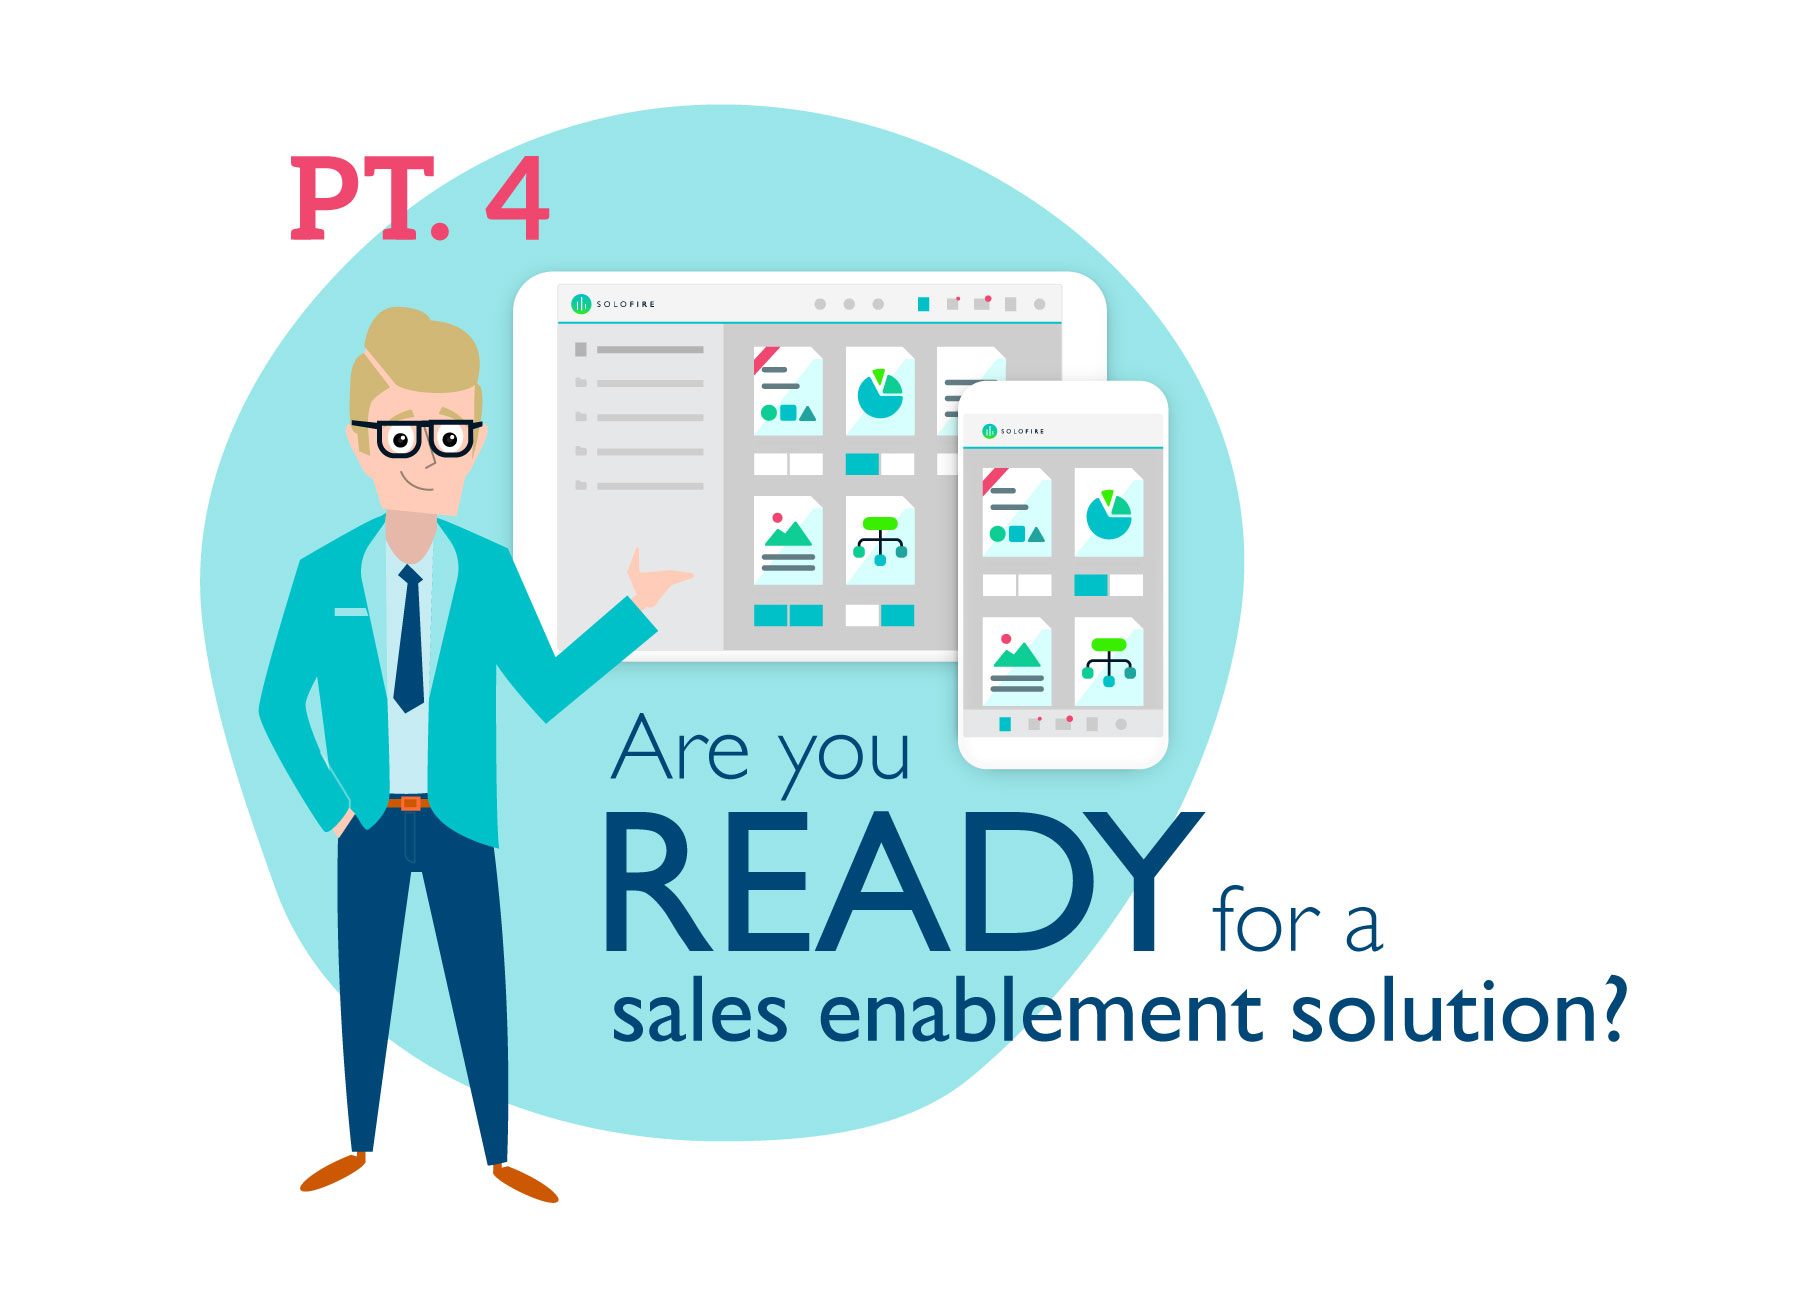 Are you ready for a sales enablement solution part 4